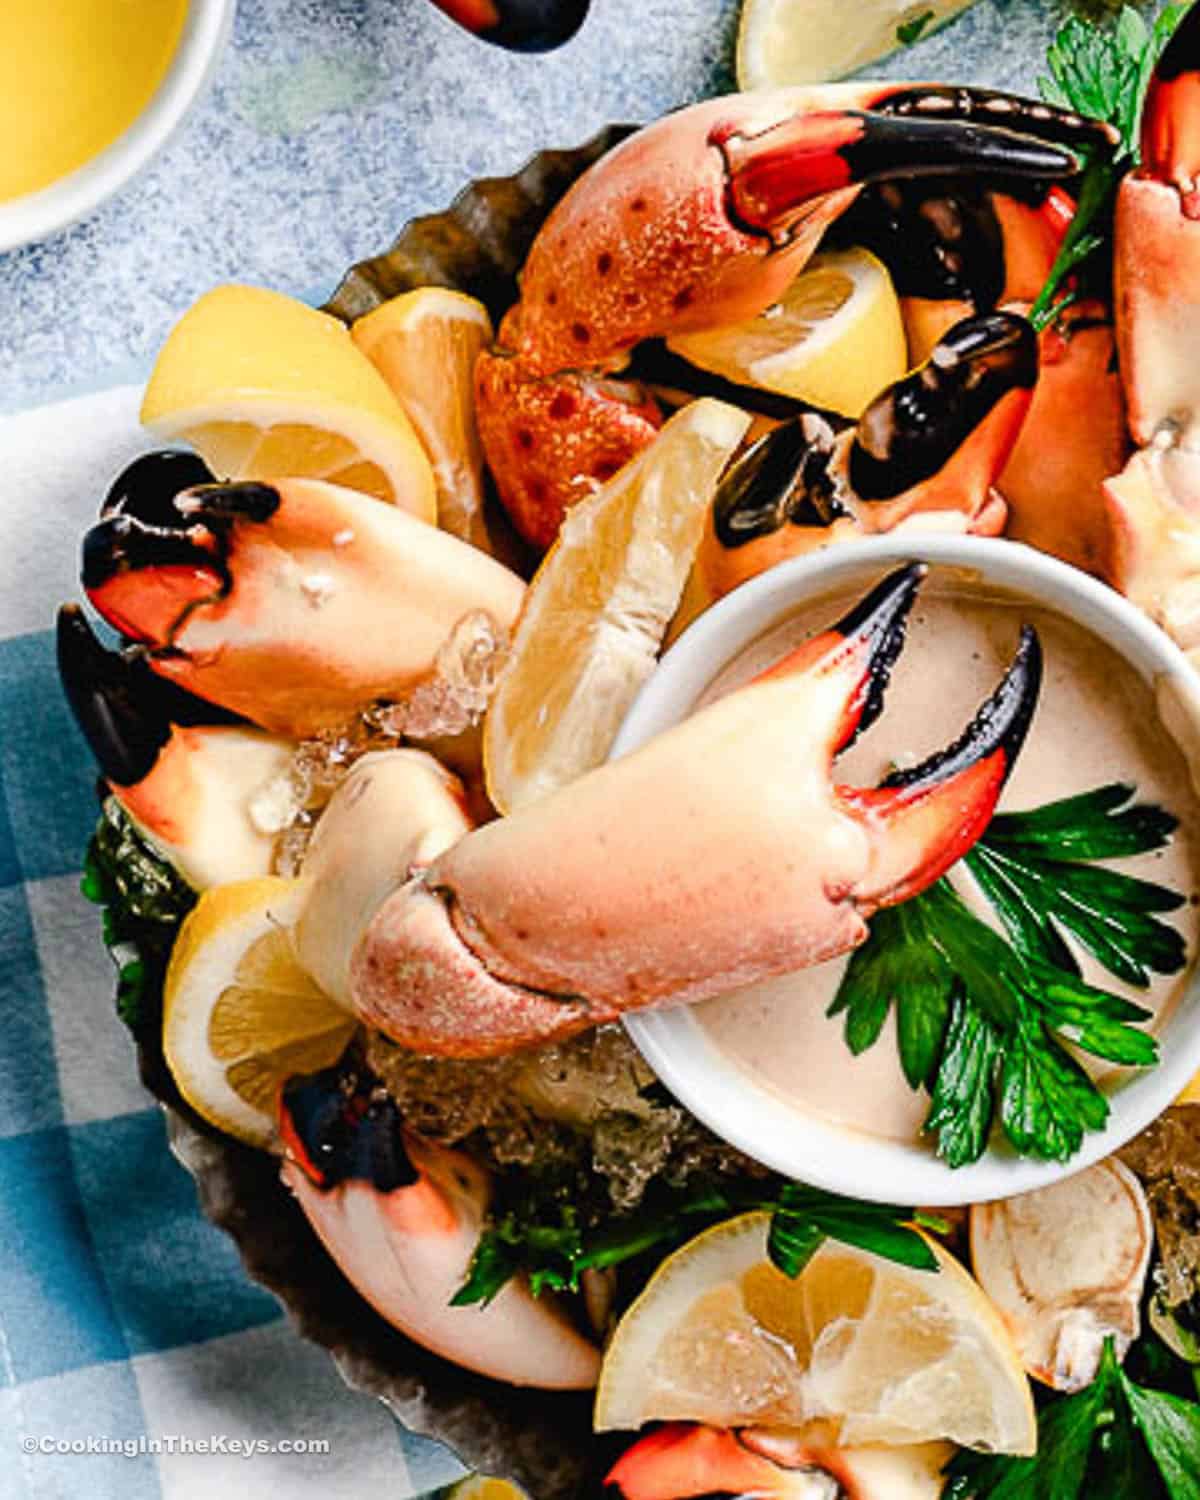 Stone crab claws on a plate with mustard sauce and lemons.